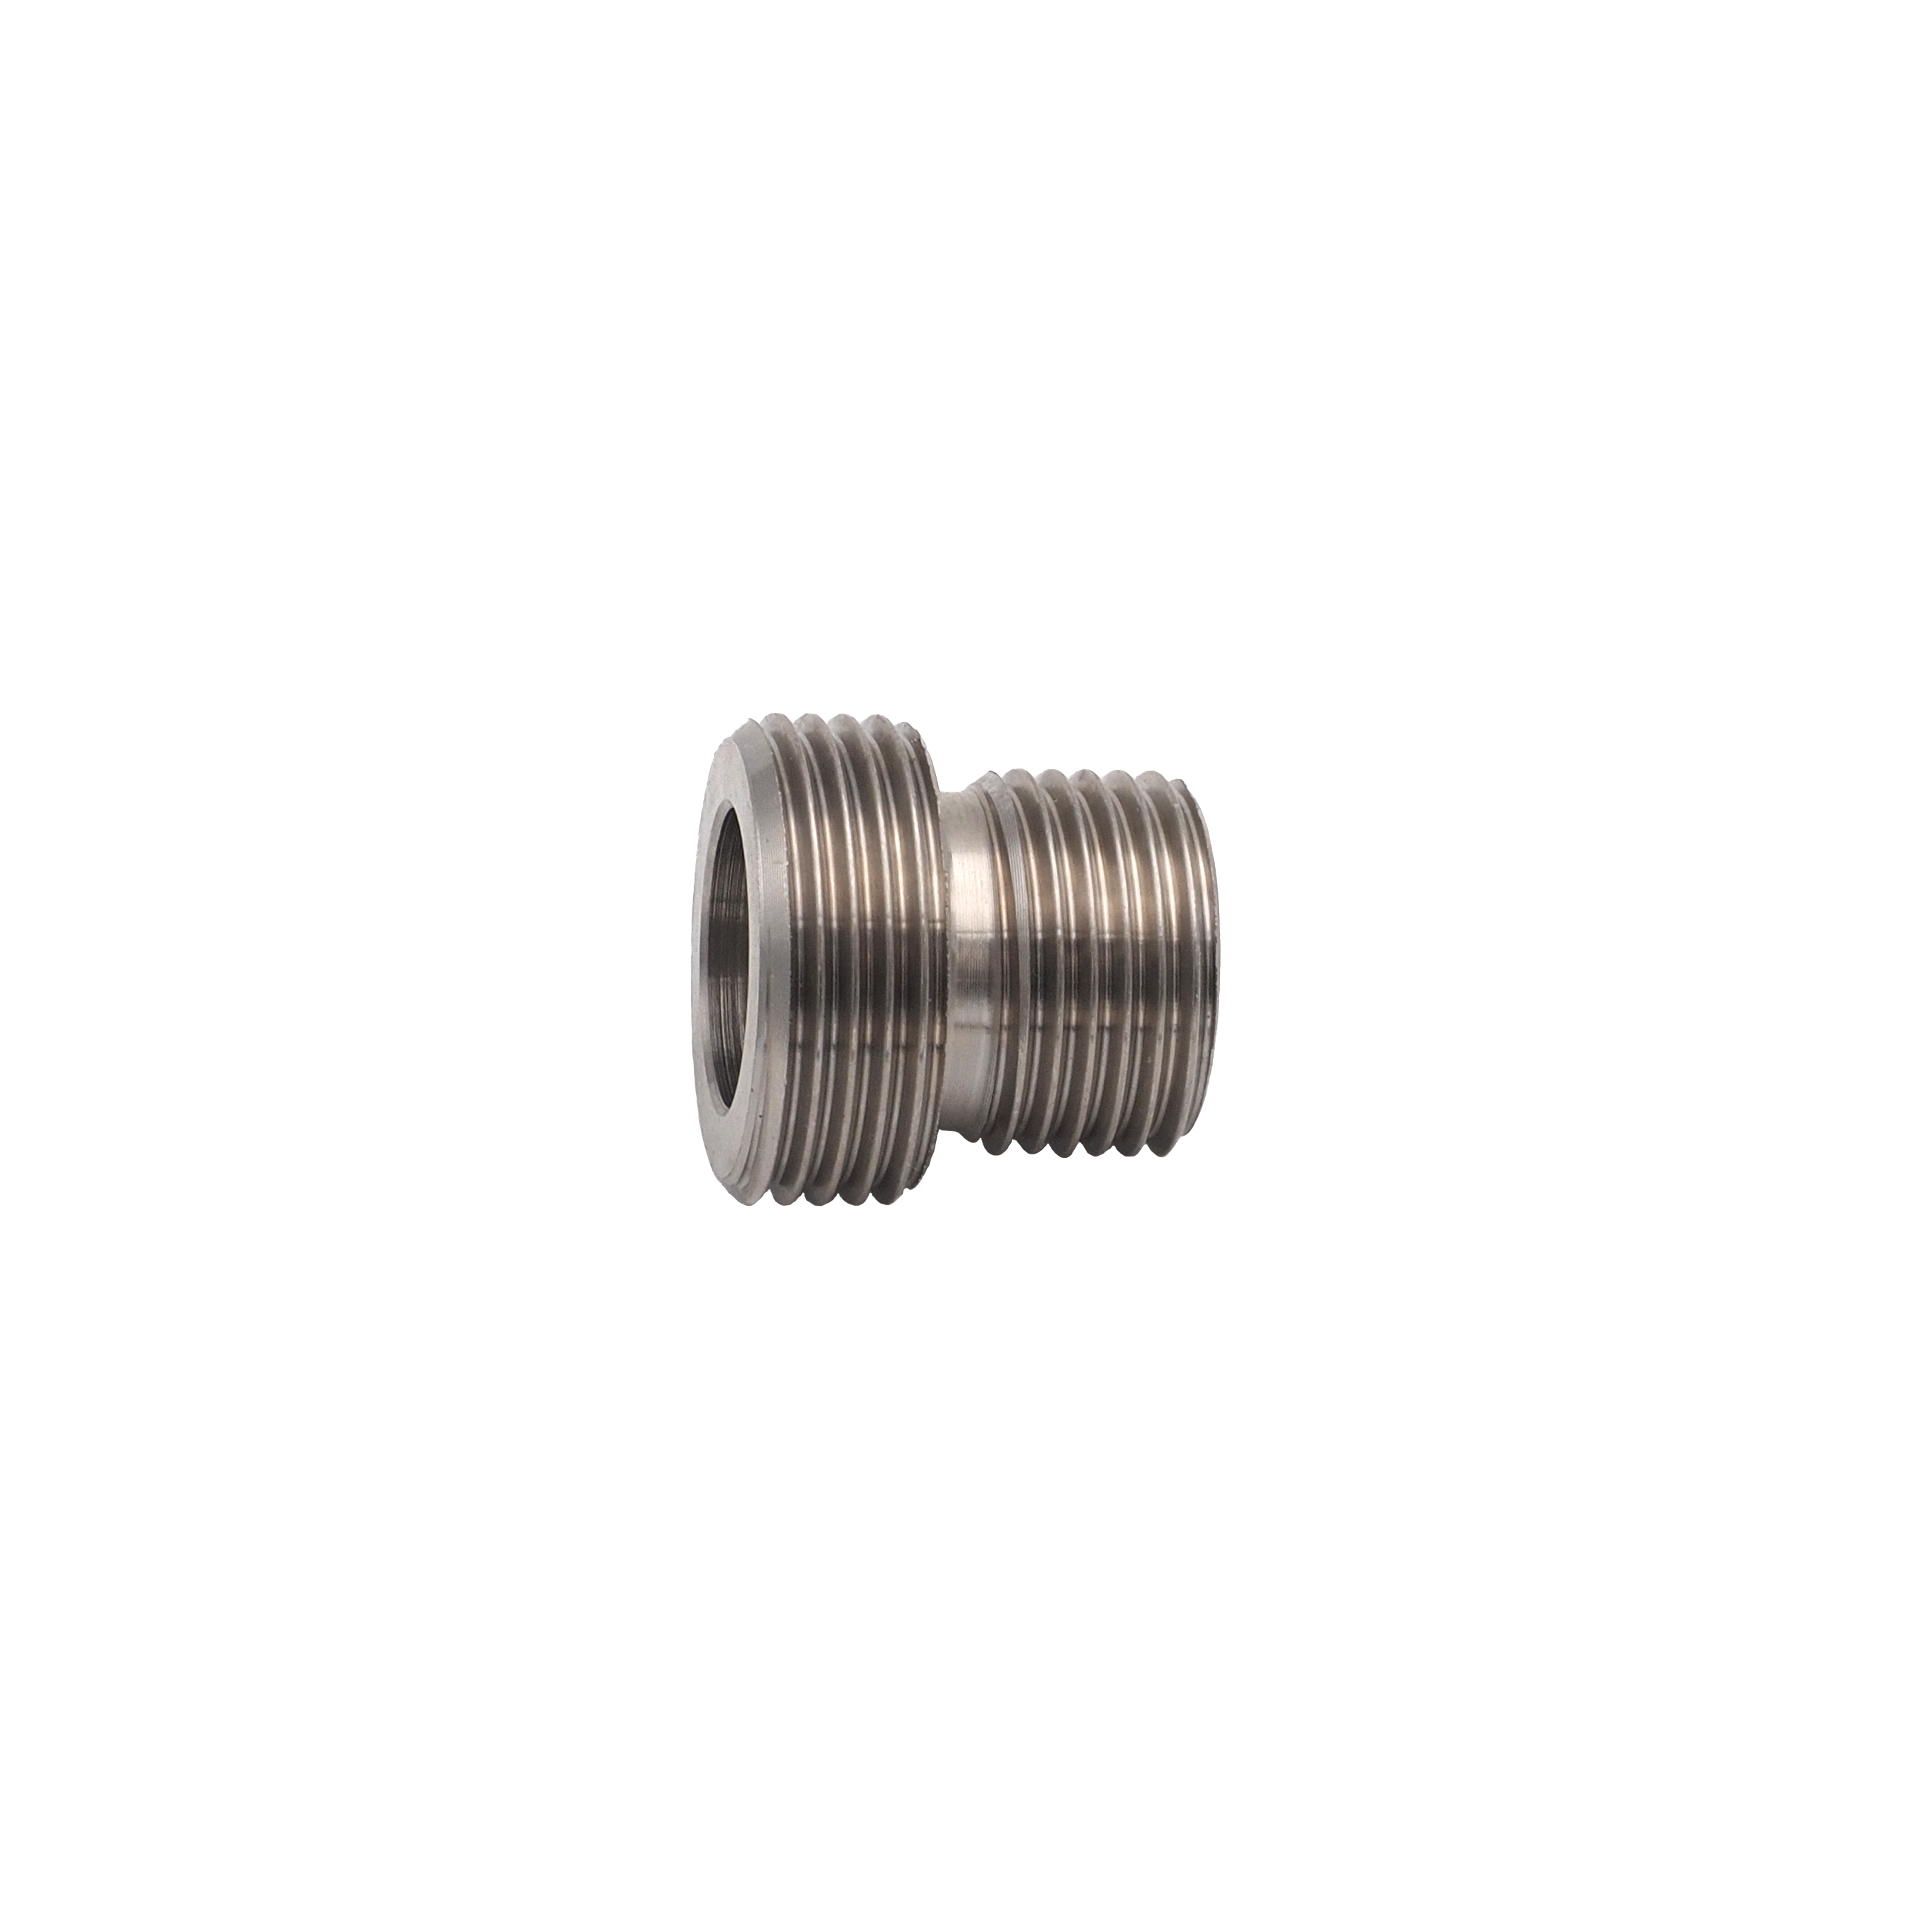 Double nipple stainless steel 1/2" - 3/4"